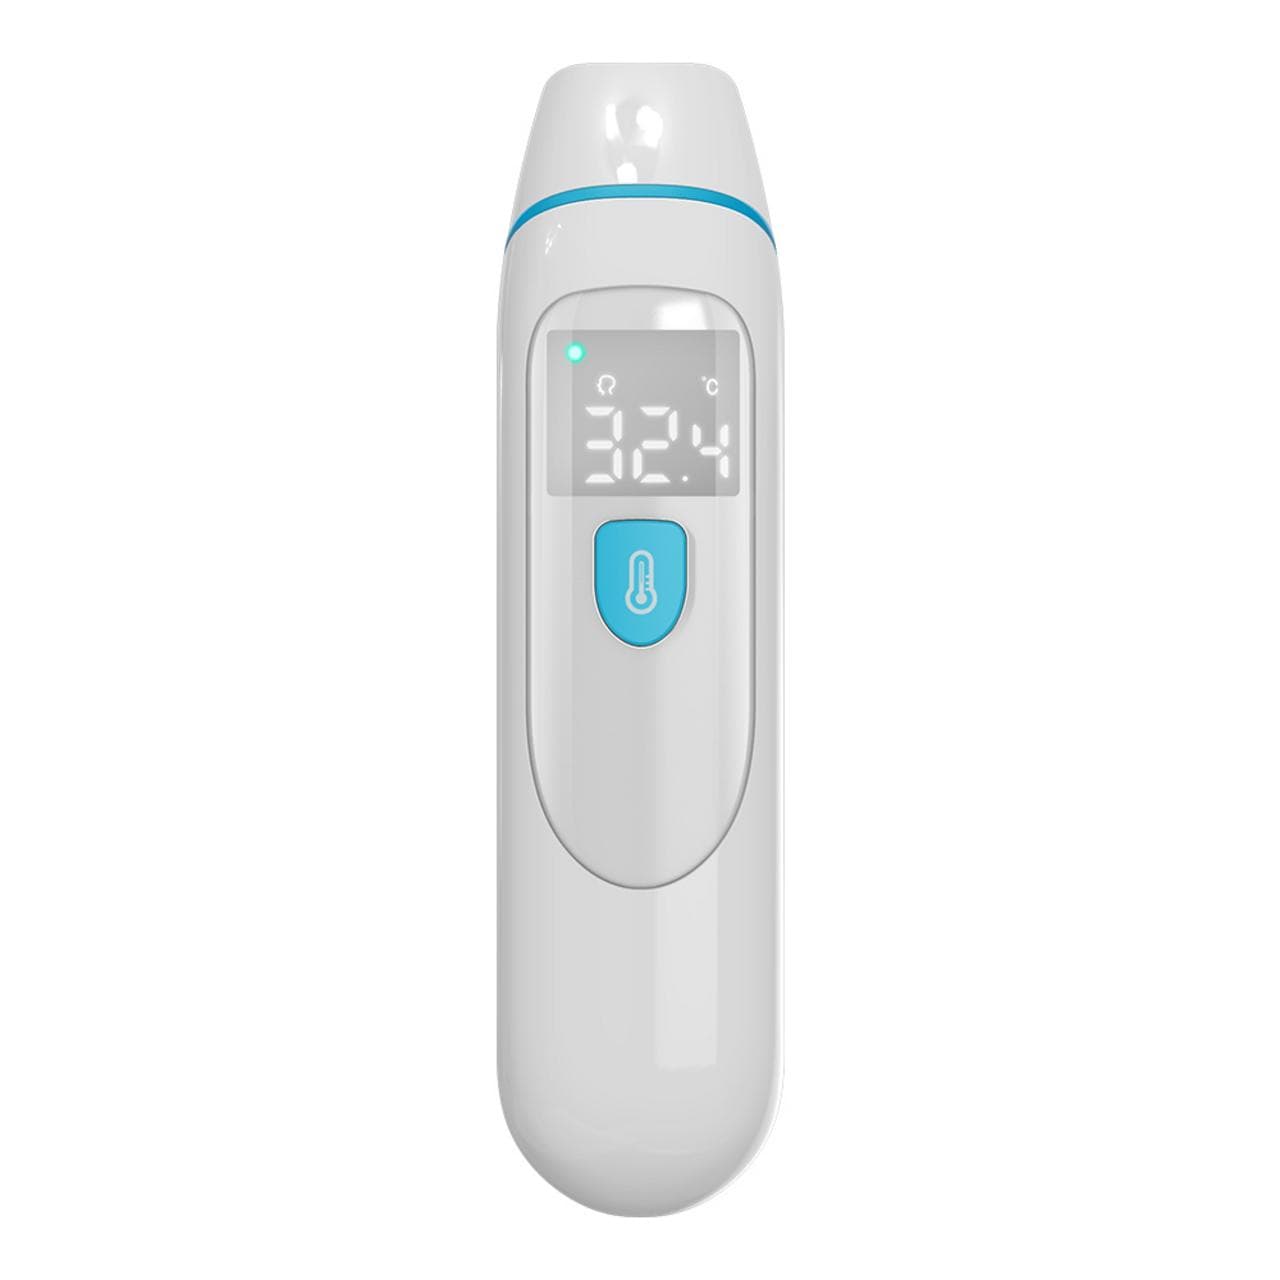 Medical Digital Infrared Thermometer